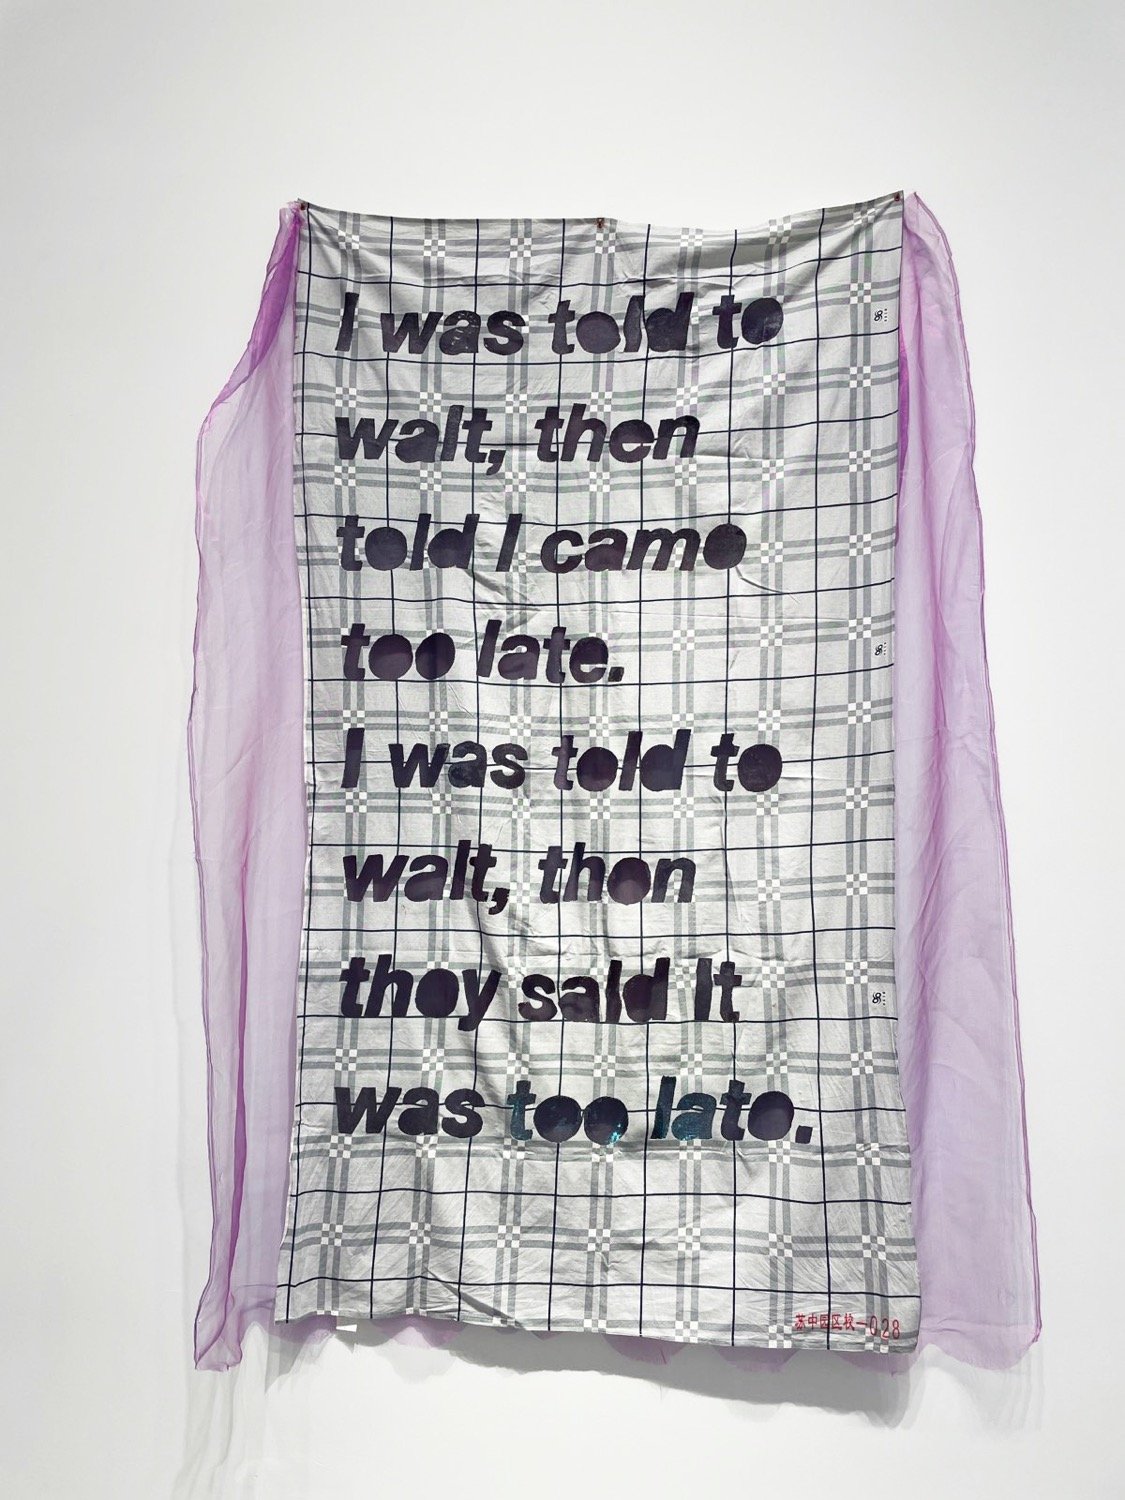   Too Late two , 2021, 3.6x6.3ft, fabric, bedsheet 